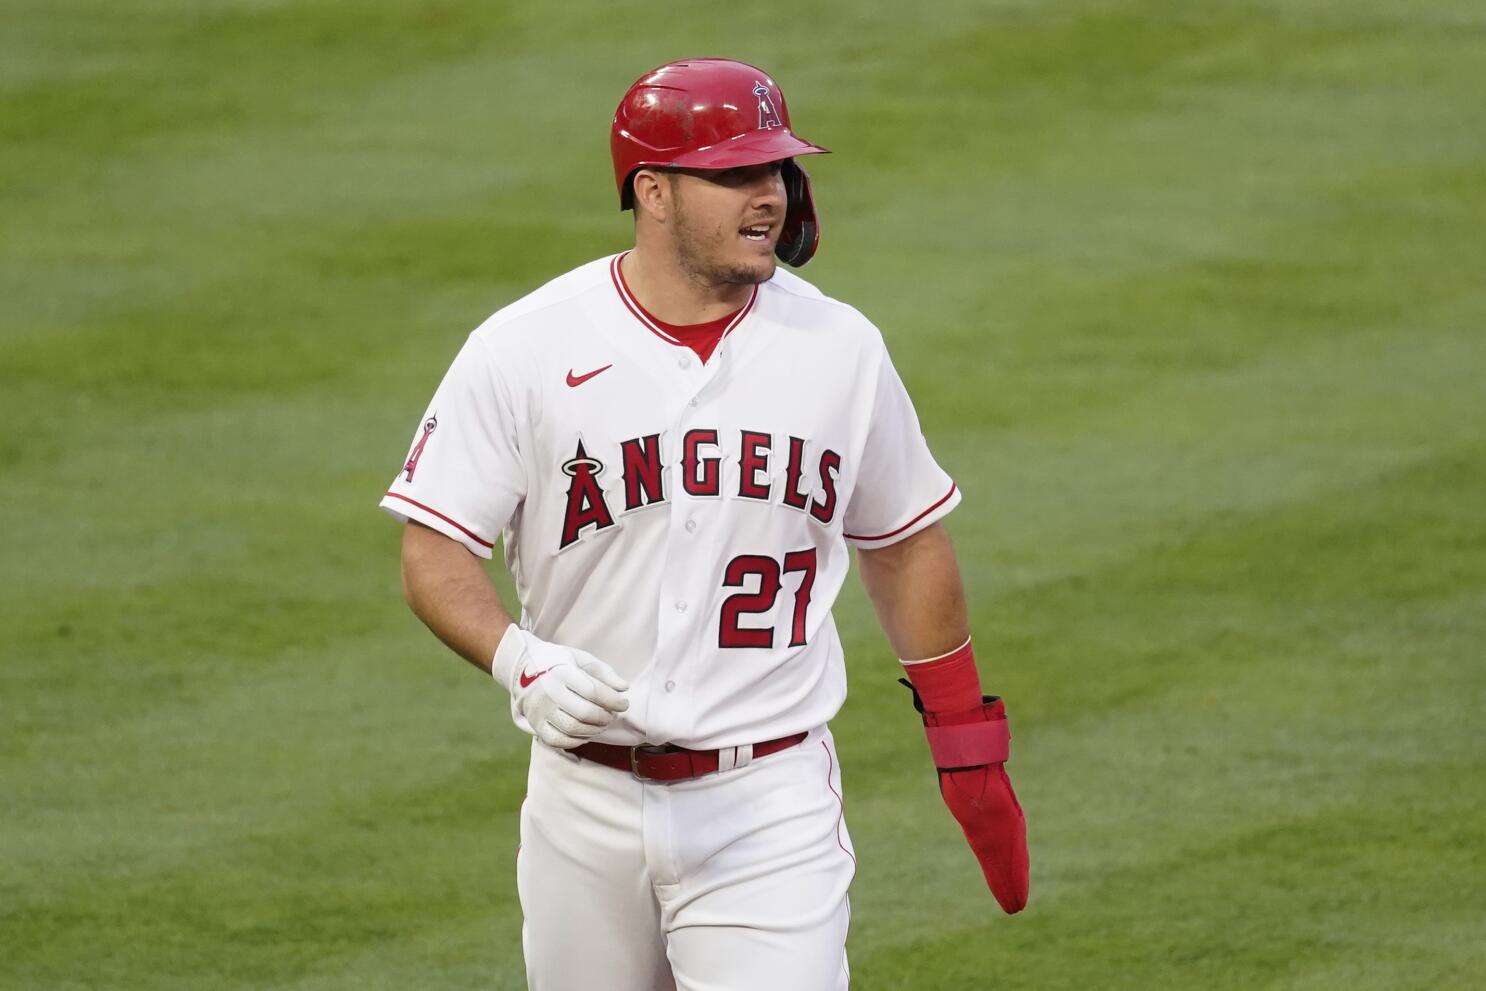 Angels rewarded for playing it straight with Mike Trout - NBC Sports